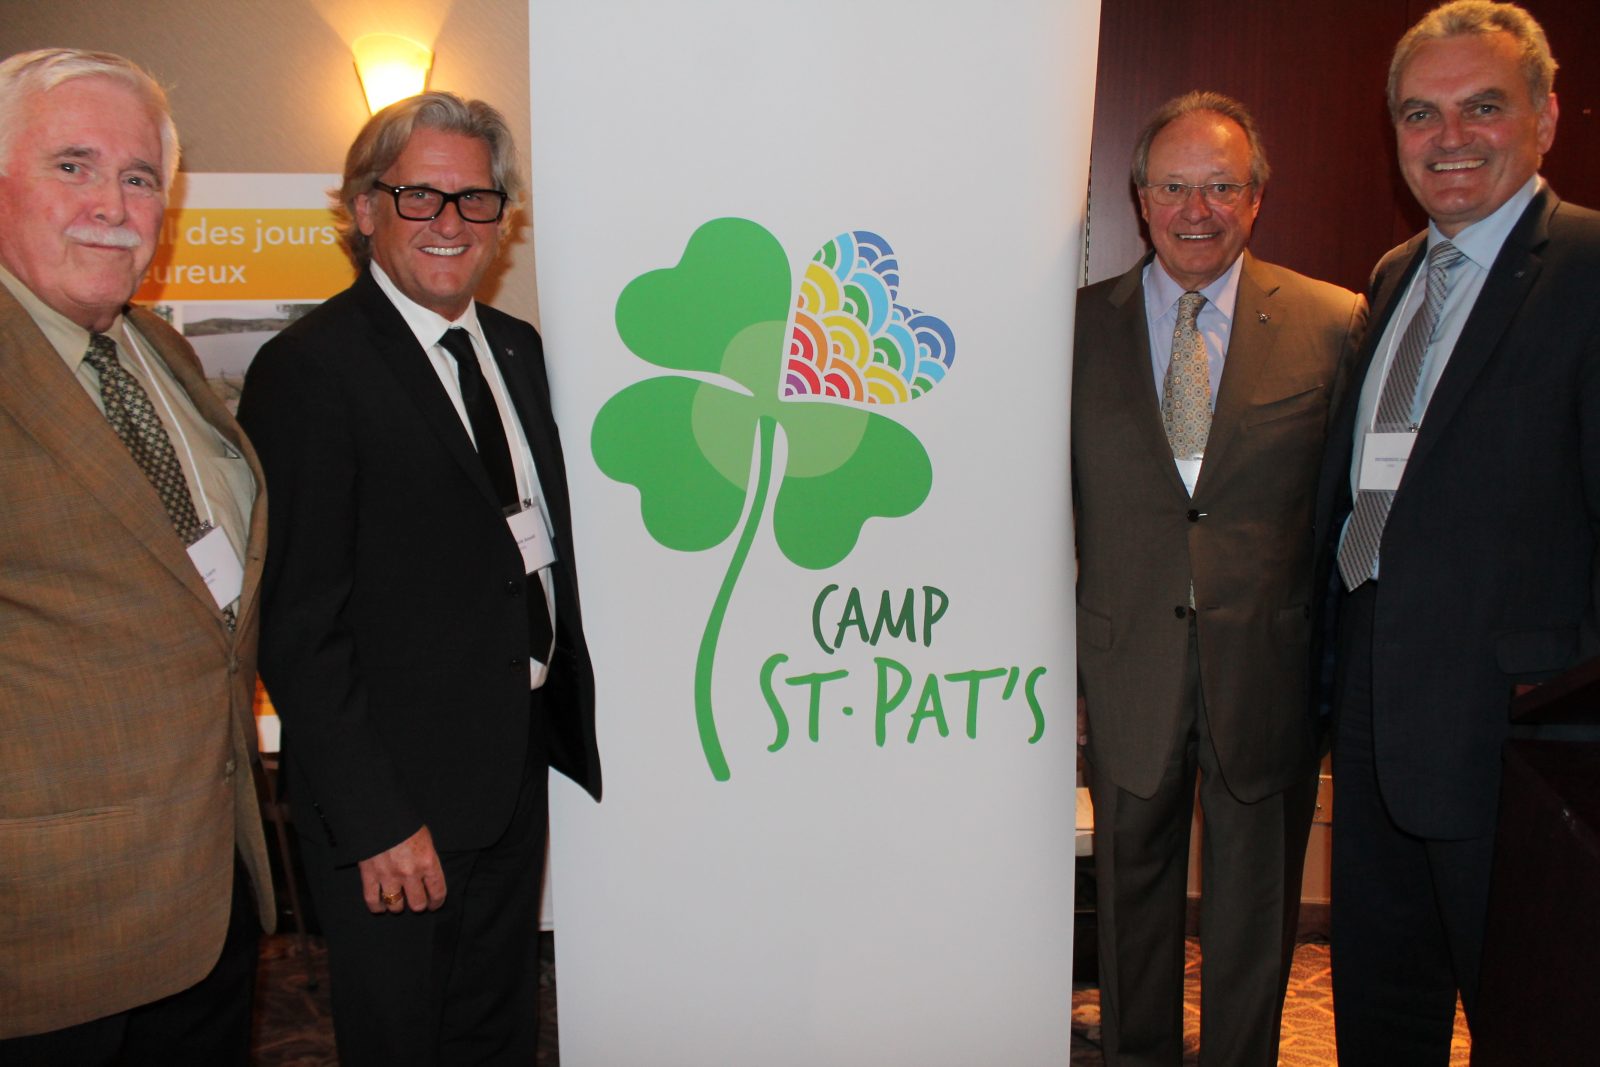 St. Pats Camp to reopen in September of 2017